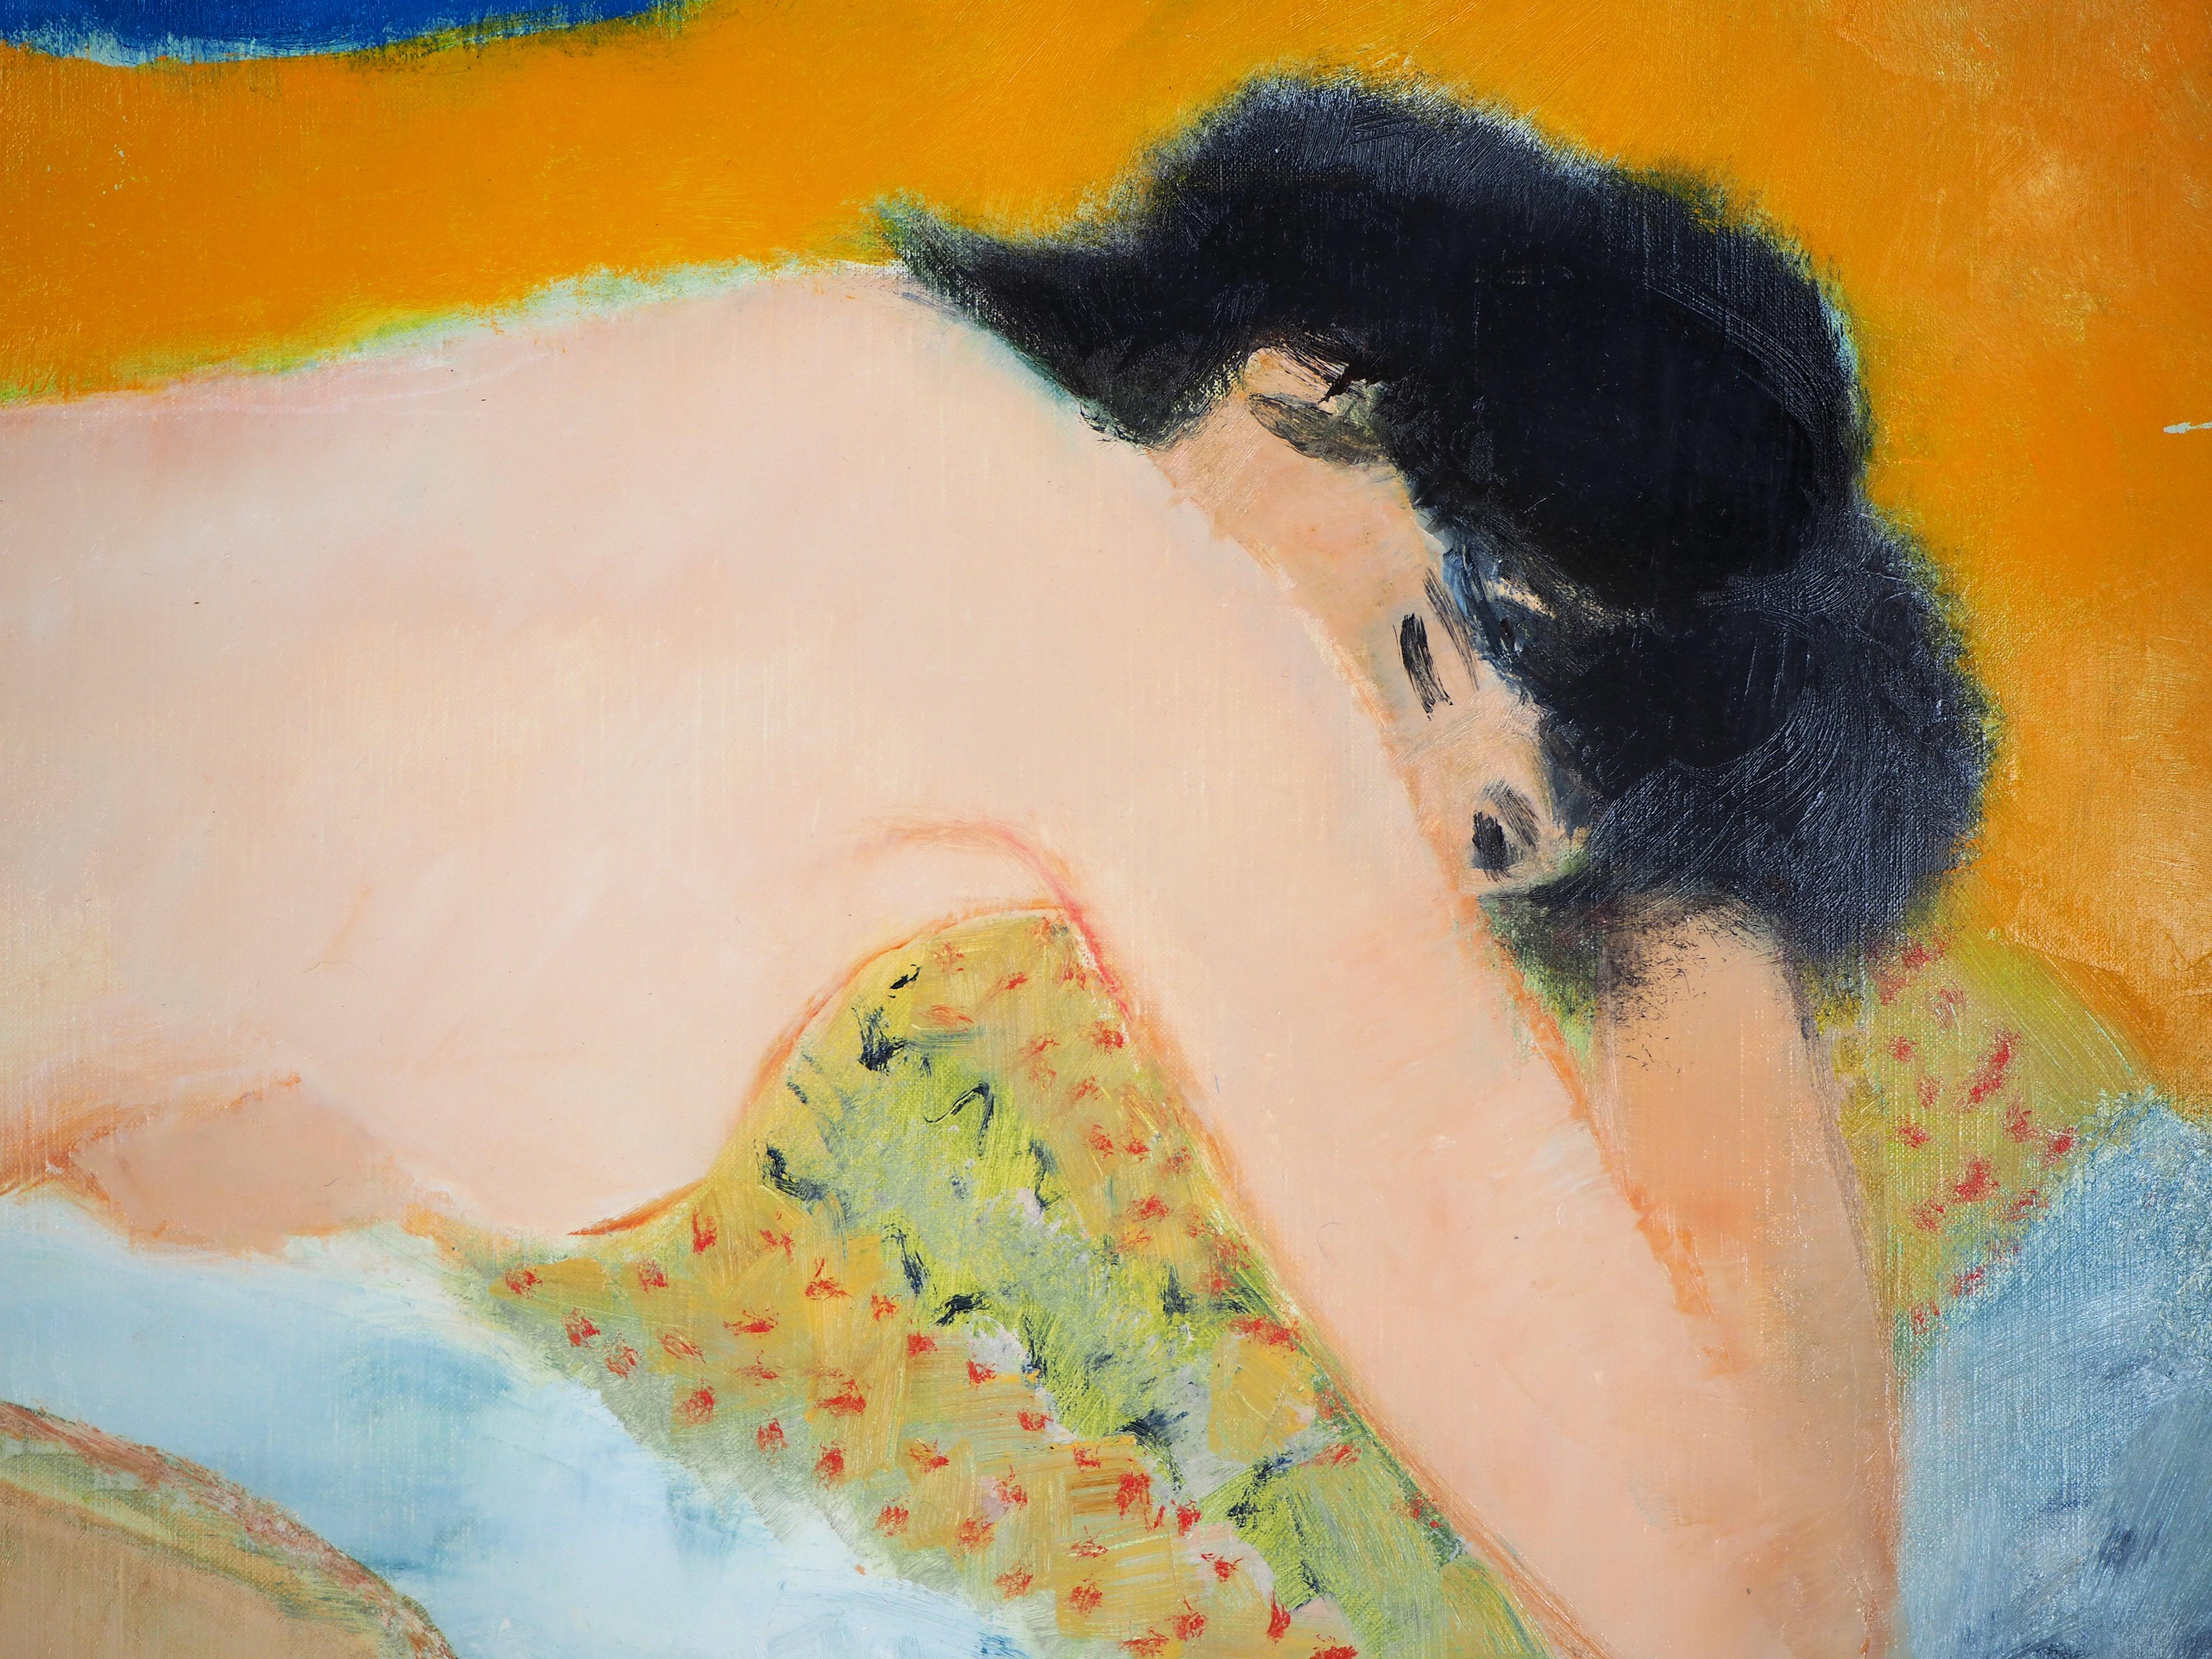 Guy Bardone
Interior : Nude Asleep on a Yellow Pillow

Original Oil on Canvas
Handsigned
On canvas 60 x 81 cm (c. 24 x 32 inch)

Excellent condition